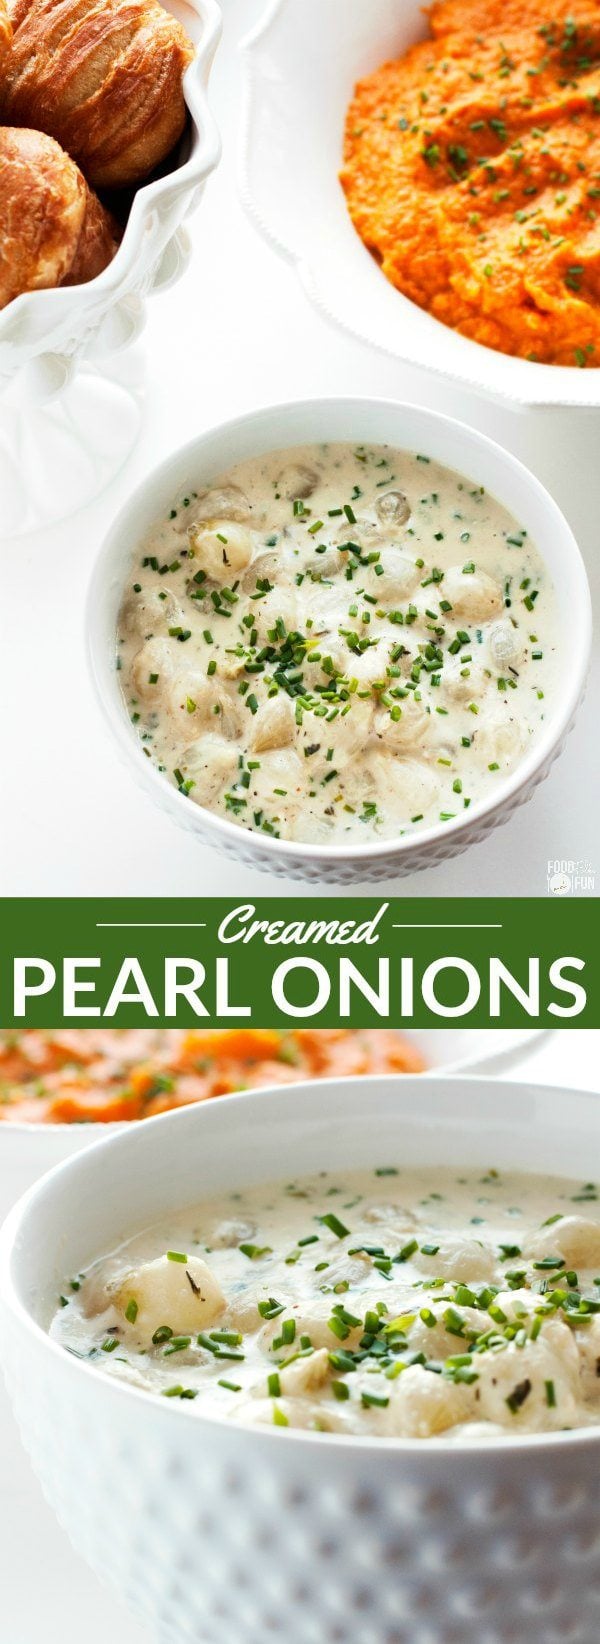 Overheard picture of creamed pearl onions.